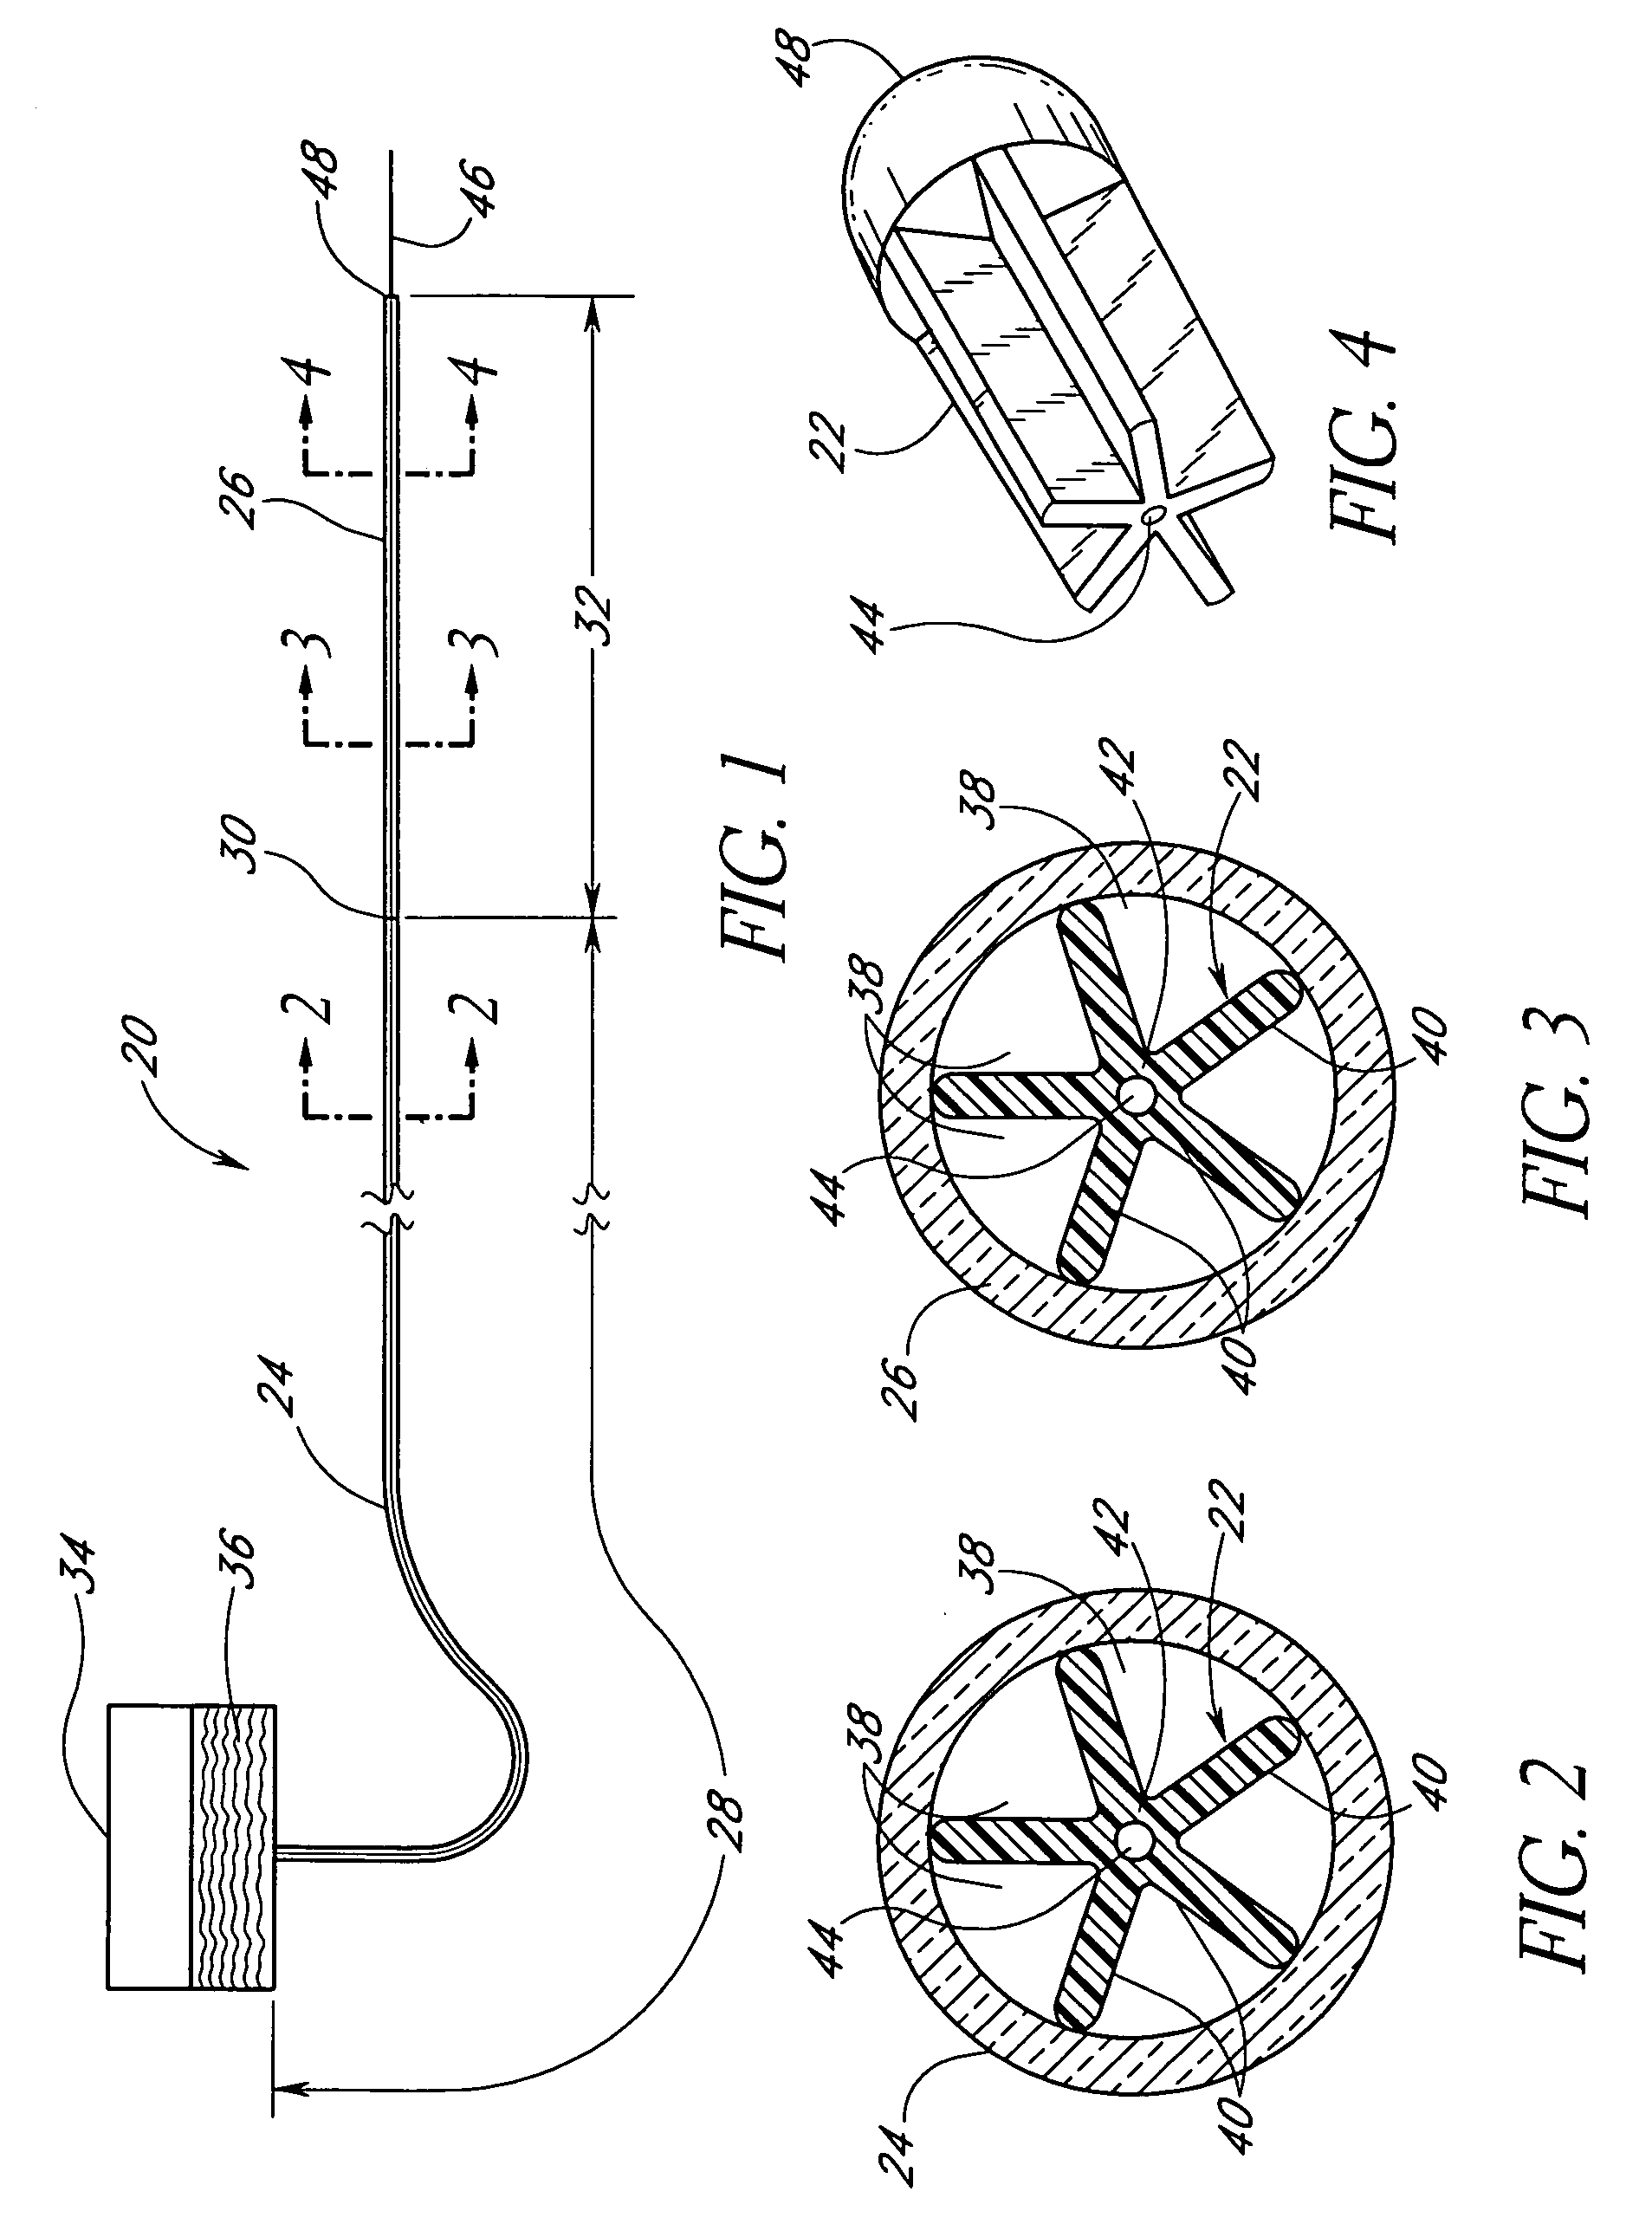 Catheter for uniform delivery of medication